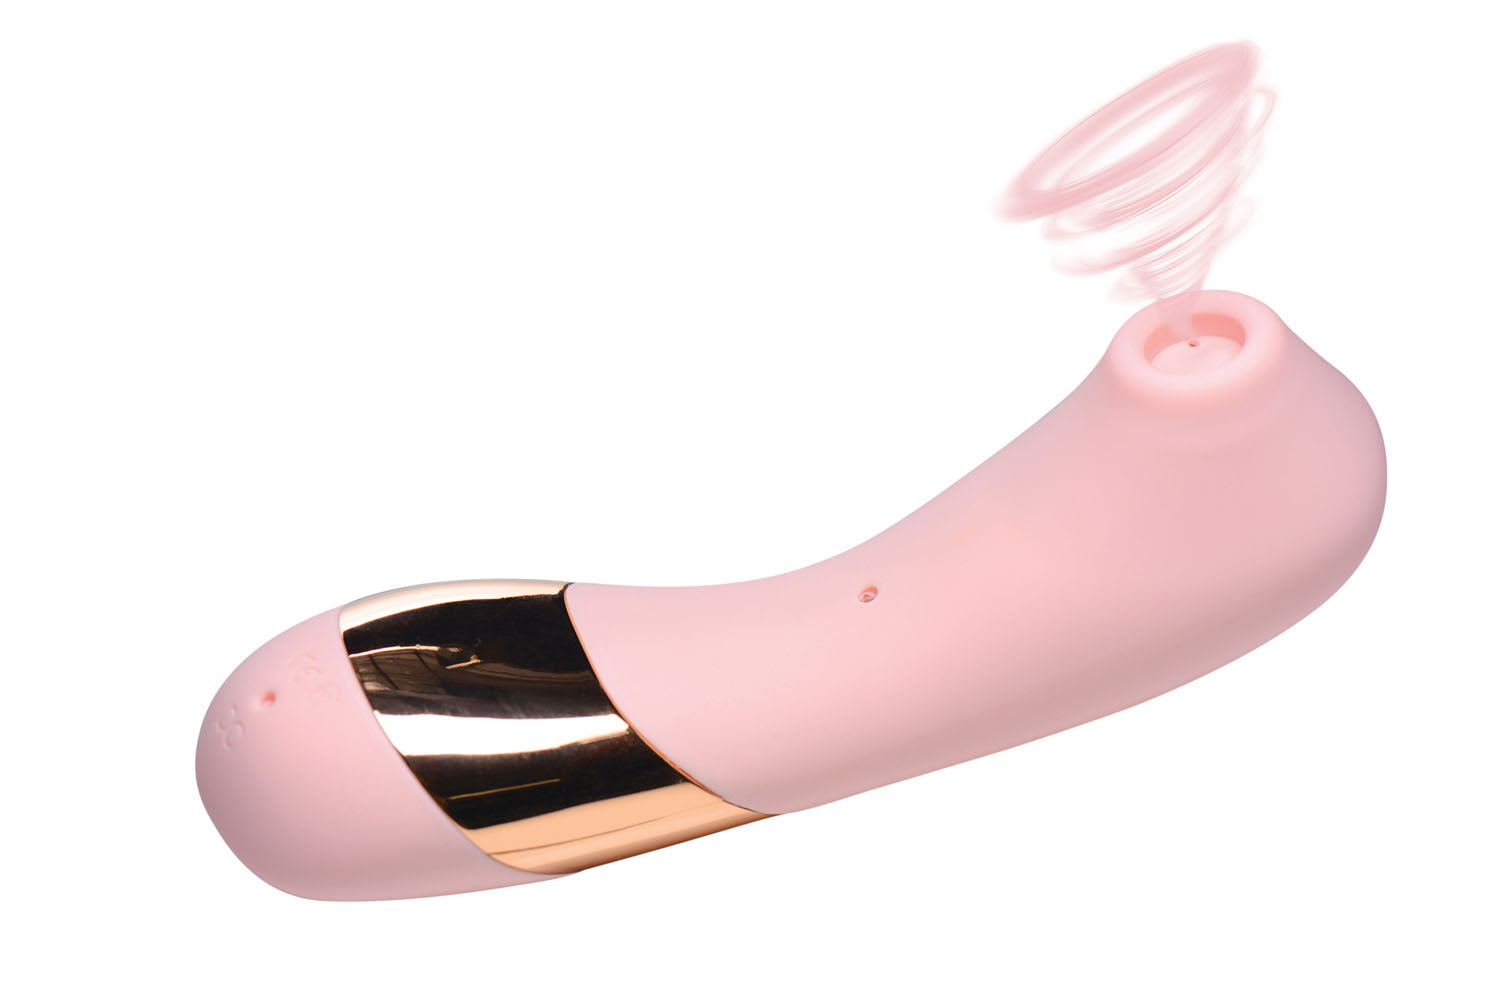 Shegasm Tickle Tickling Clit Stimulator With Suction - Pink